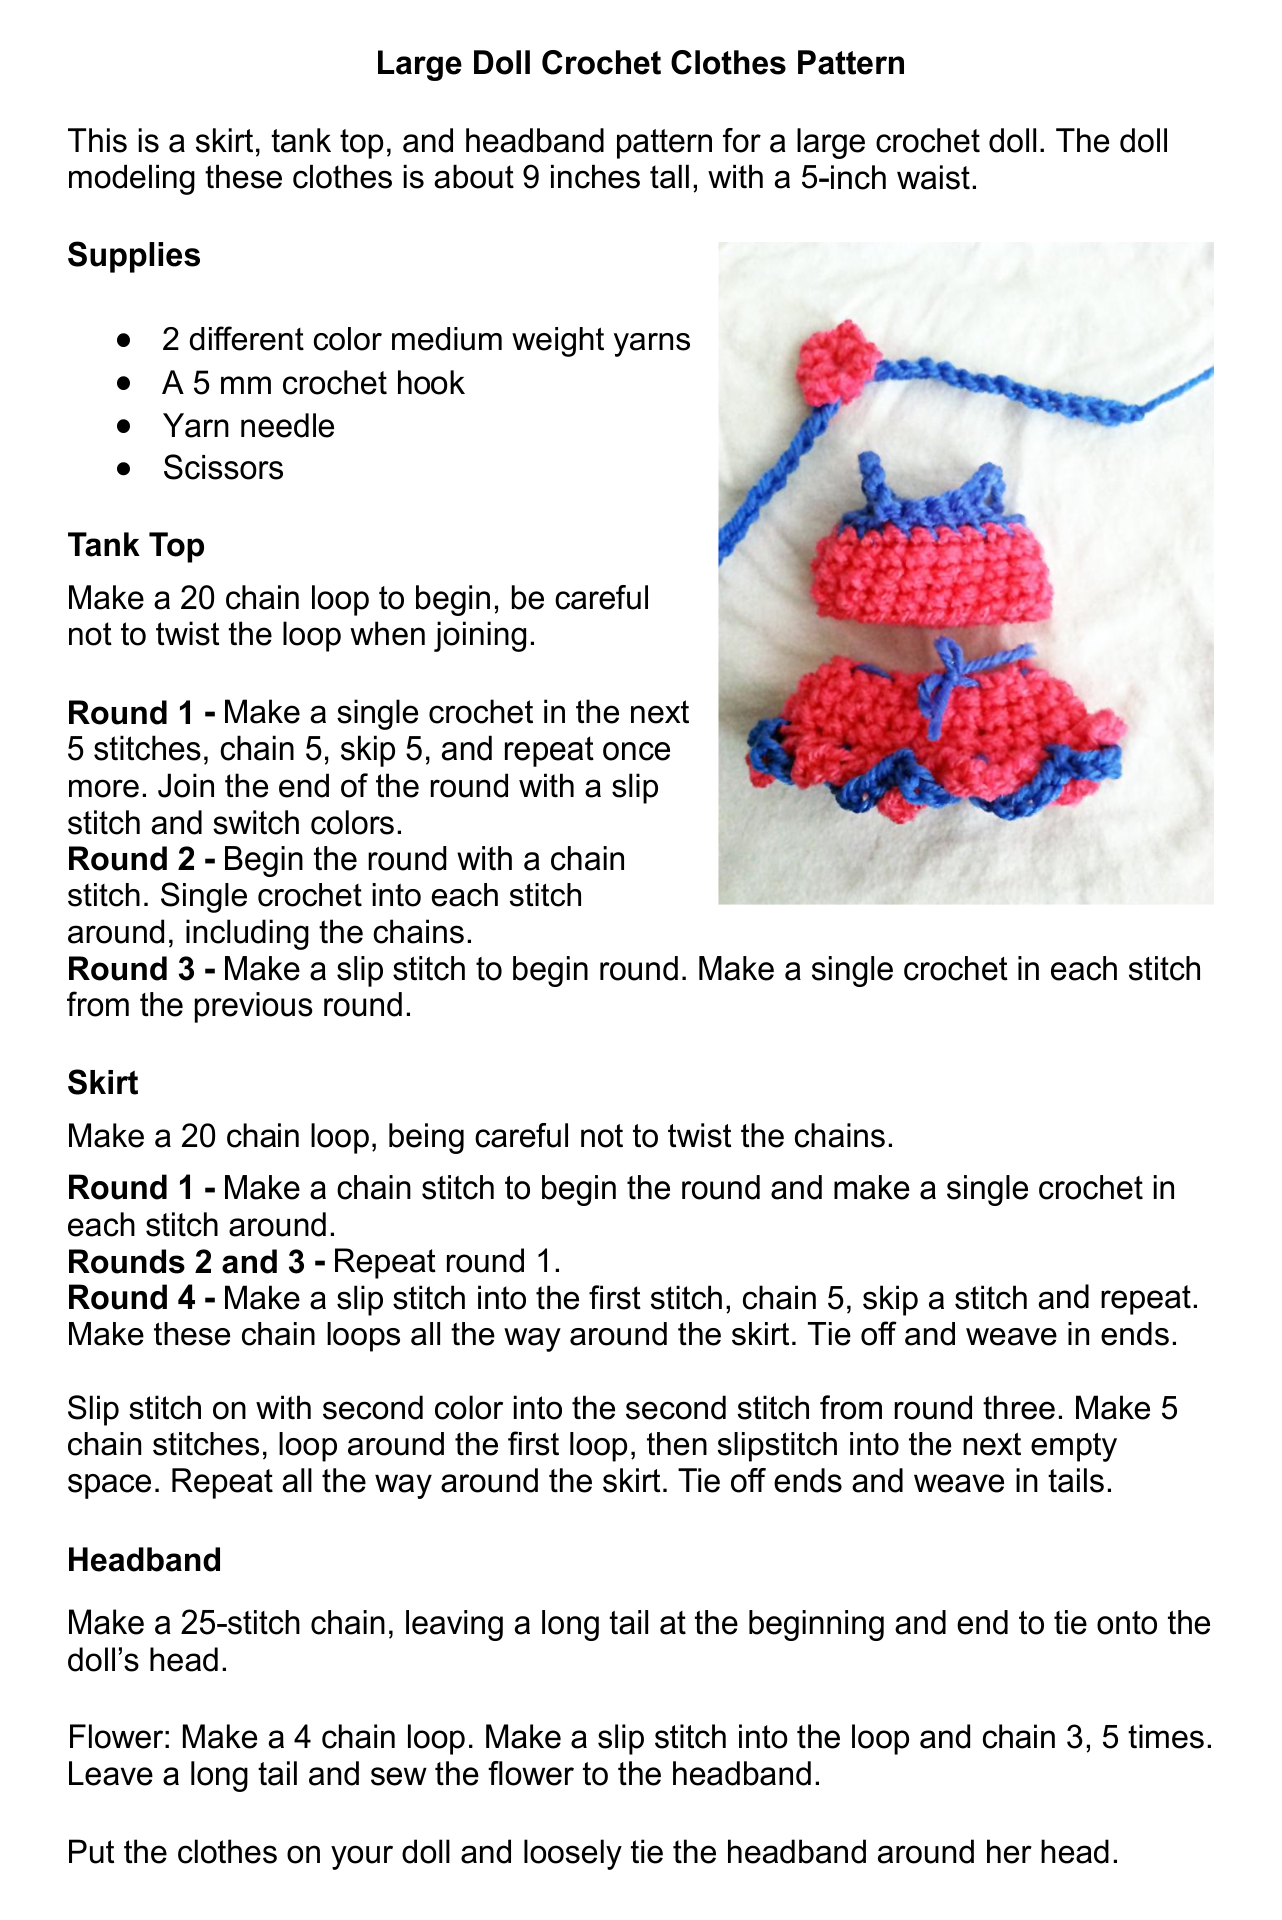 Crochet Doll Clothes Patterns